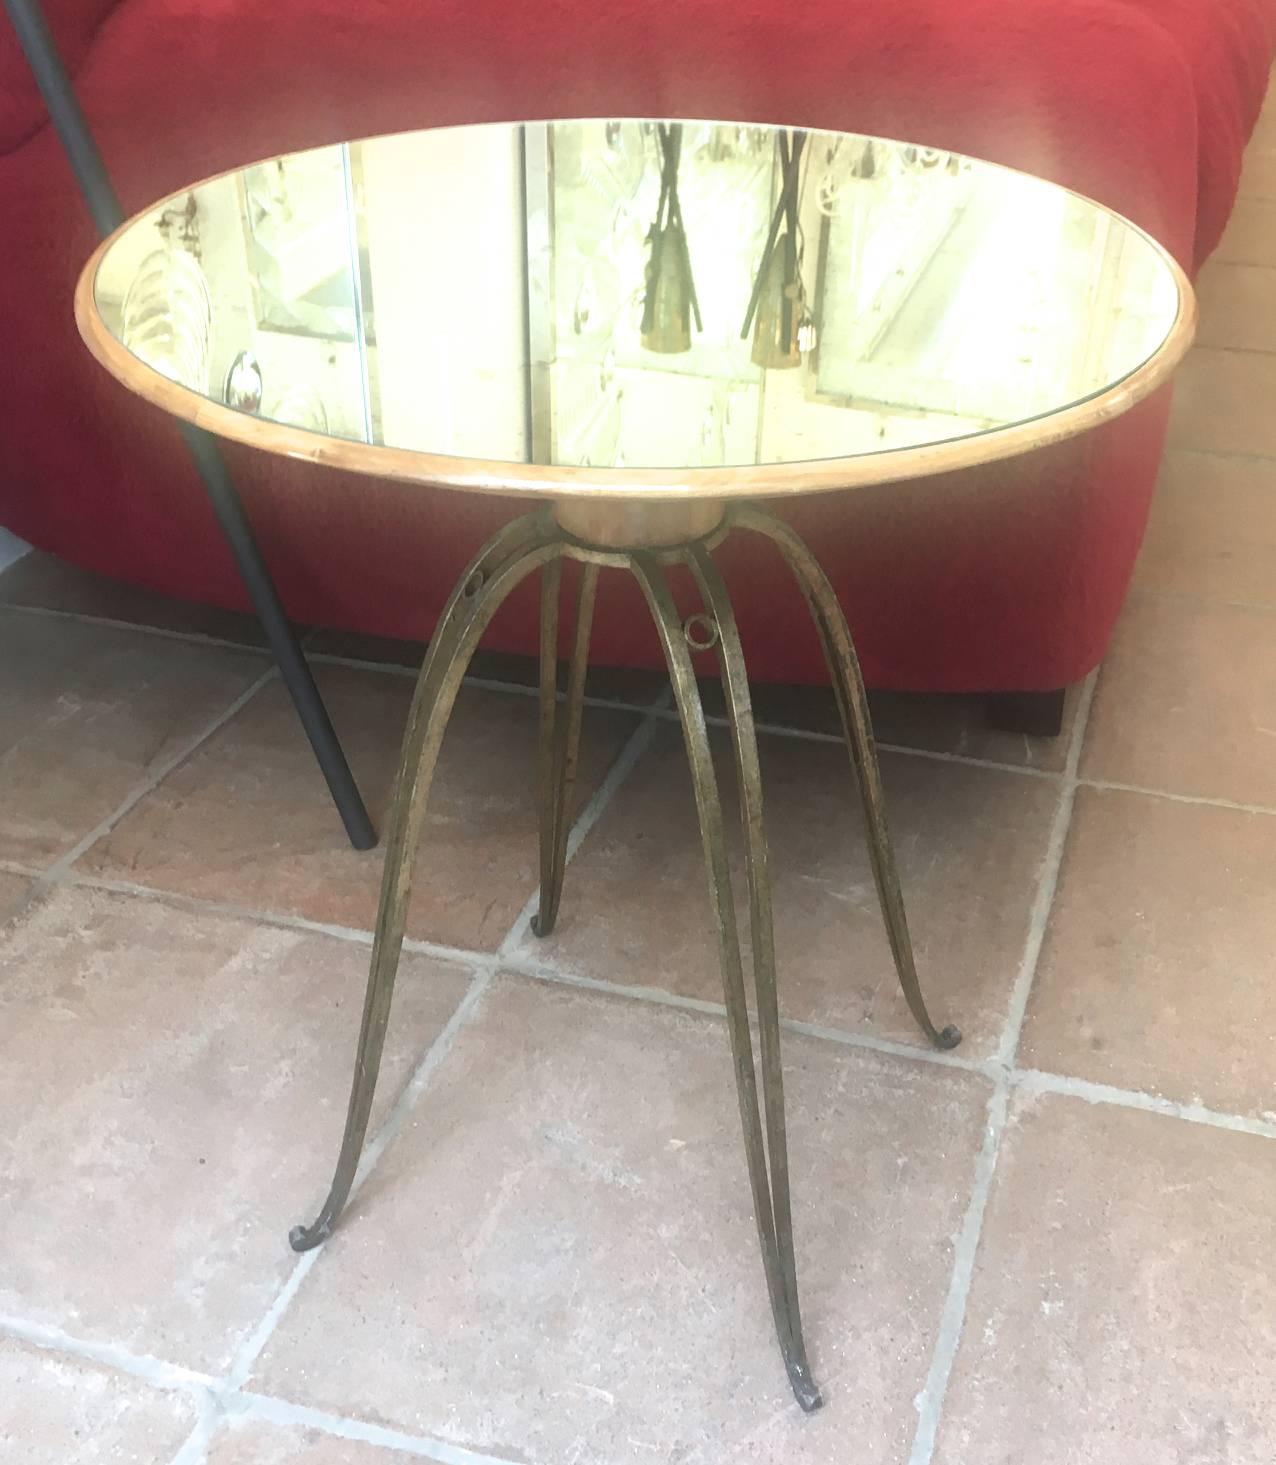 Mid-20th Century Rene Prou Rare Refined Pair of Side Table in Sycamore and Gold Leaf Wrought Iron For Sale